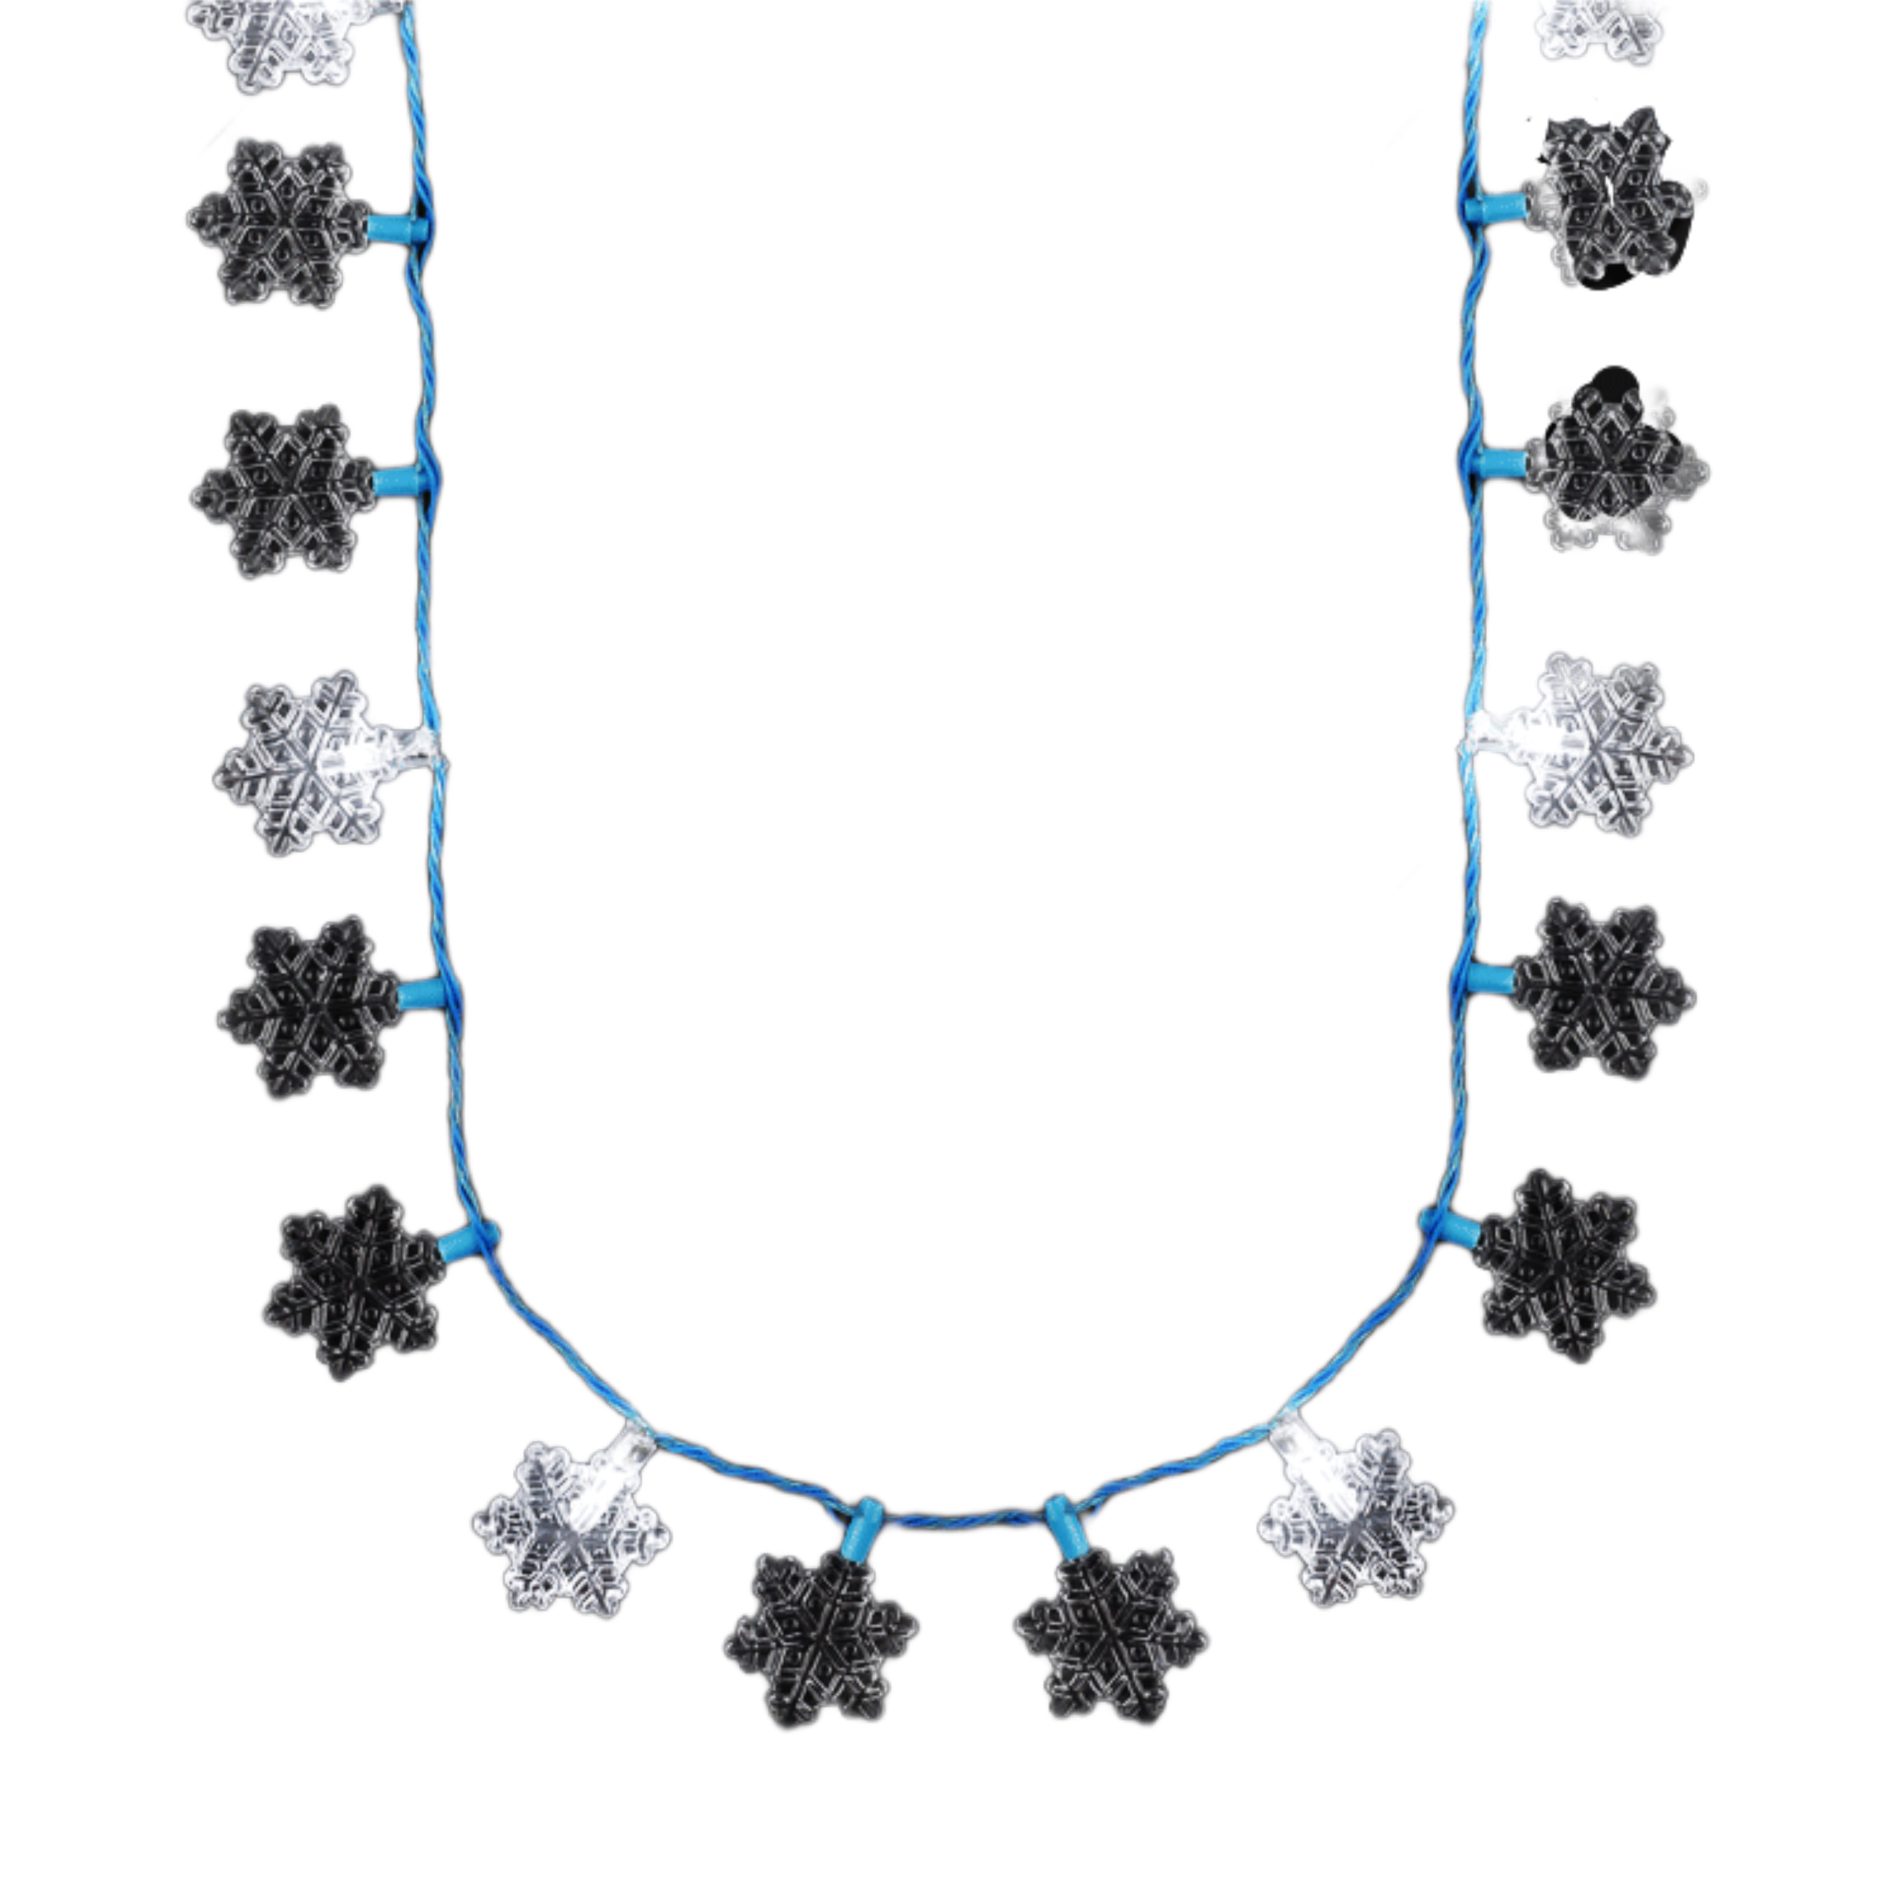 Snowflake String Lights Necklace All Products 5